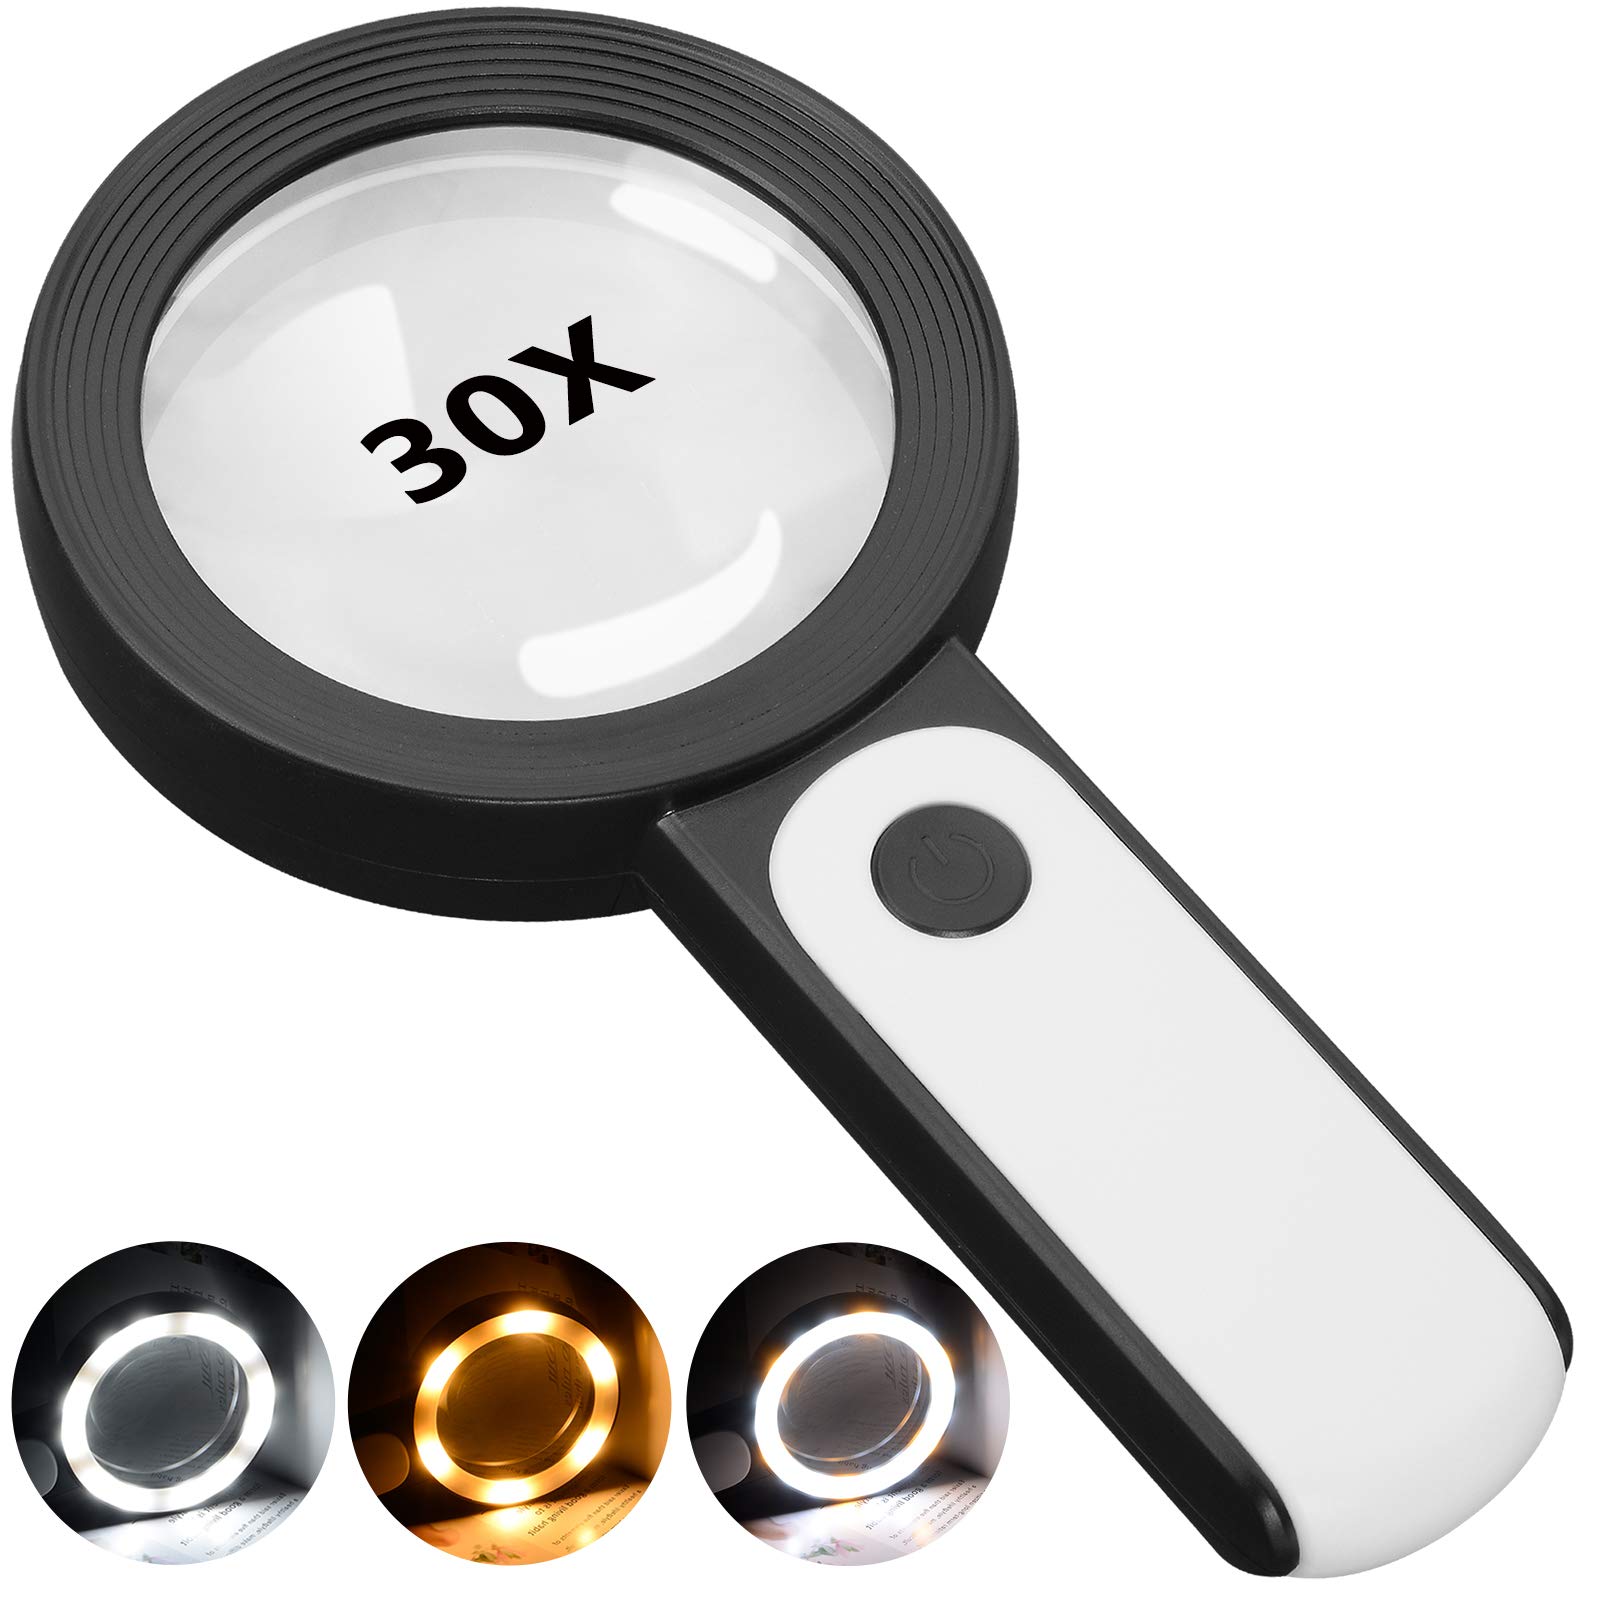 JMH Magnifying Glass with Light, 30X Handheld Large Magnifying